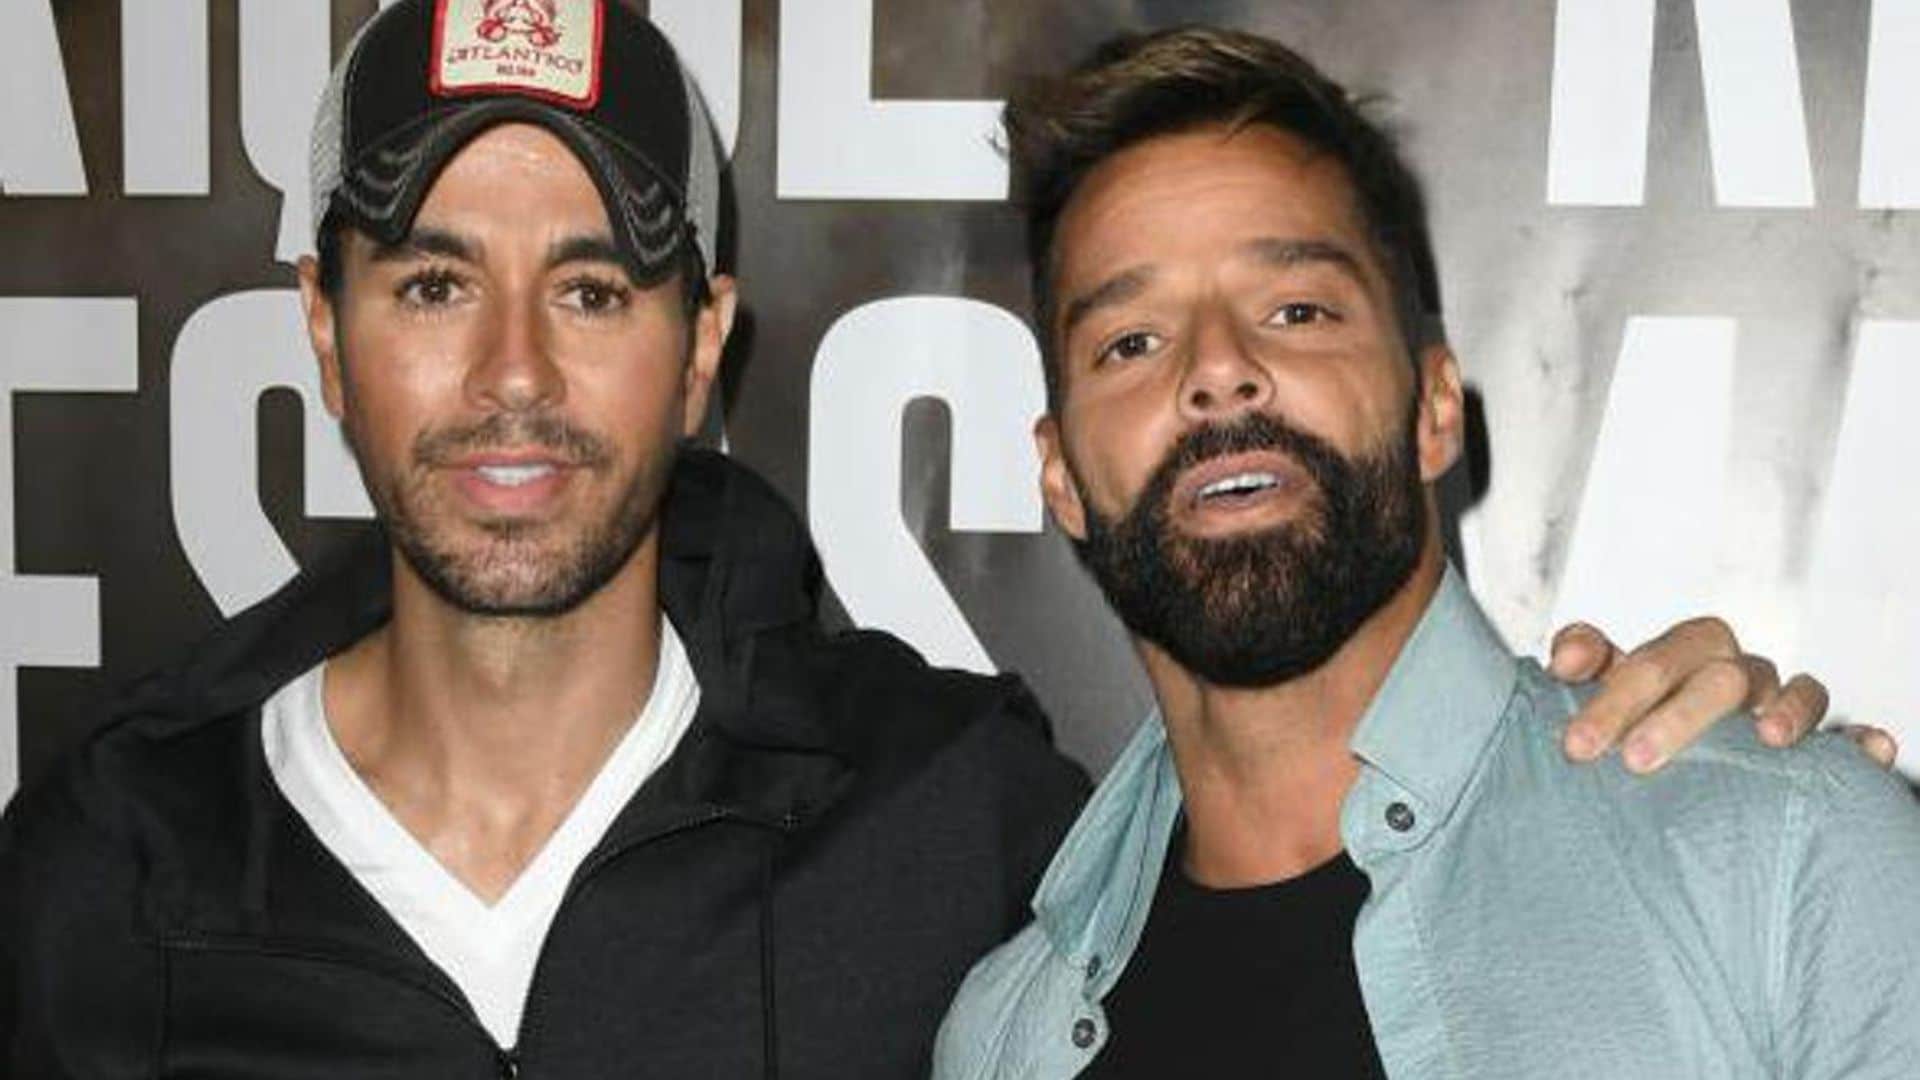 Ricky Martin and Enrique Iglesias share excitement as they return to The Trilogy Tour